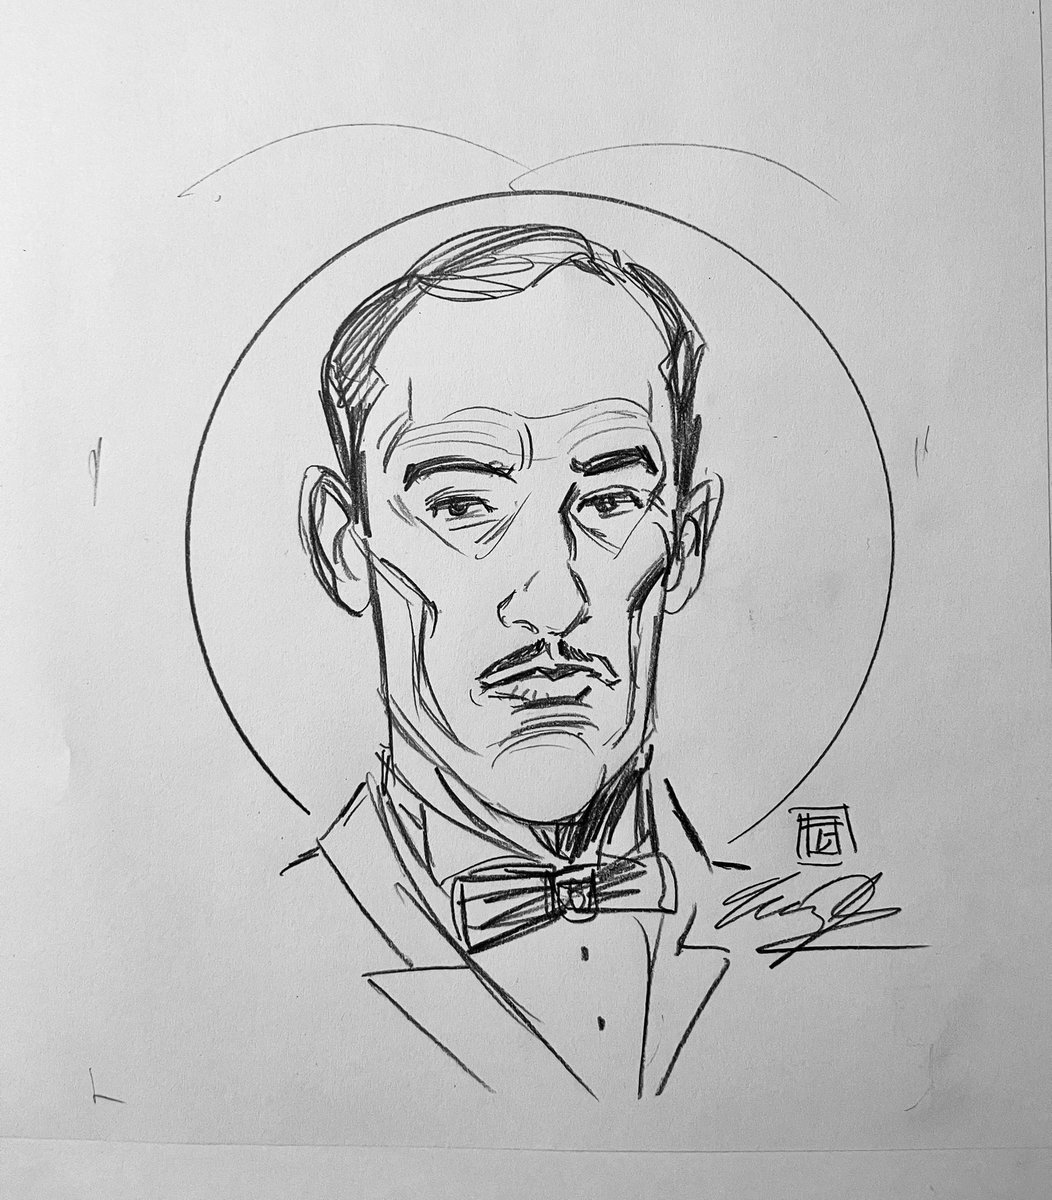 Layout sketch for an Alfred sketch cover commission. Inks coming soon. 

Message me today to get on my commission list 

#batman #alfredpennyworth #sketchvover #commissionsopen